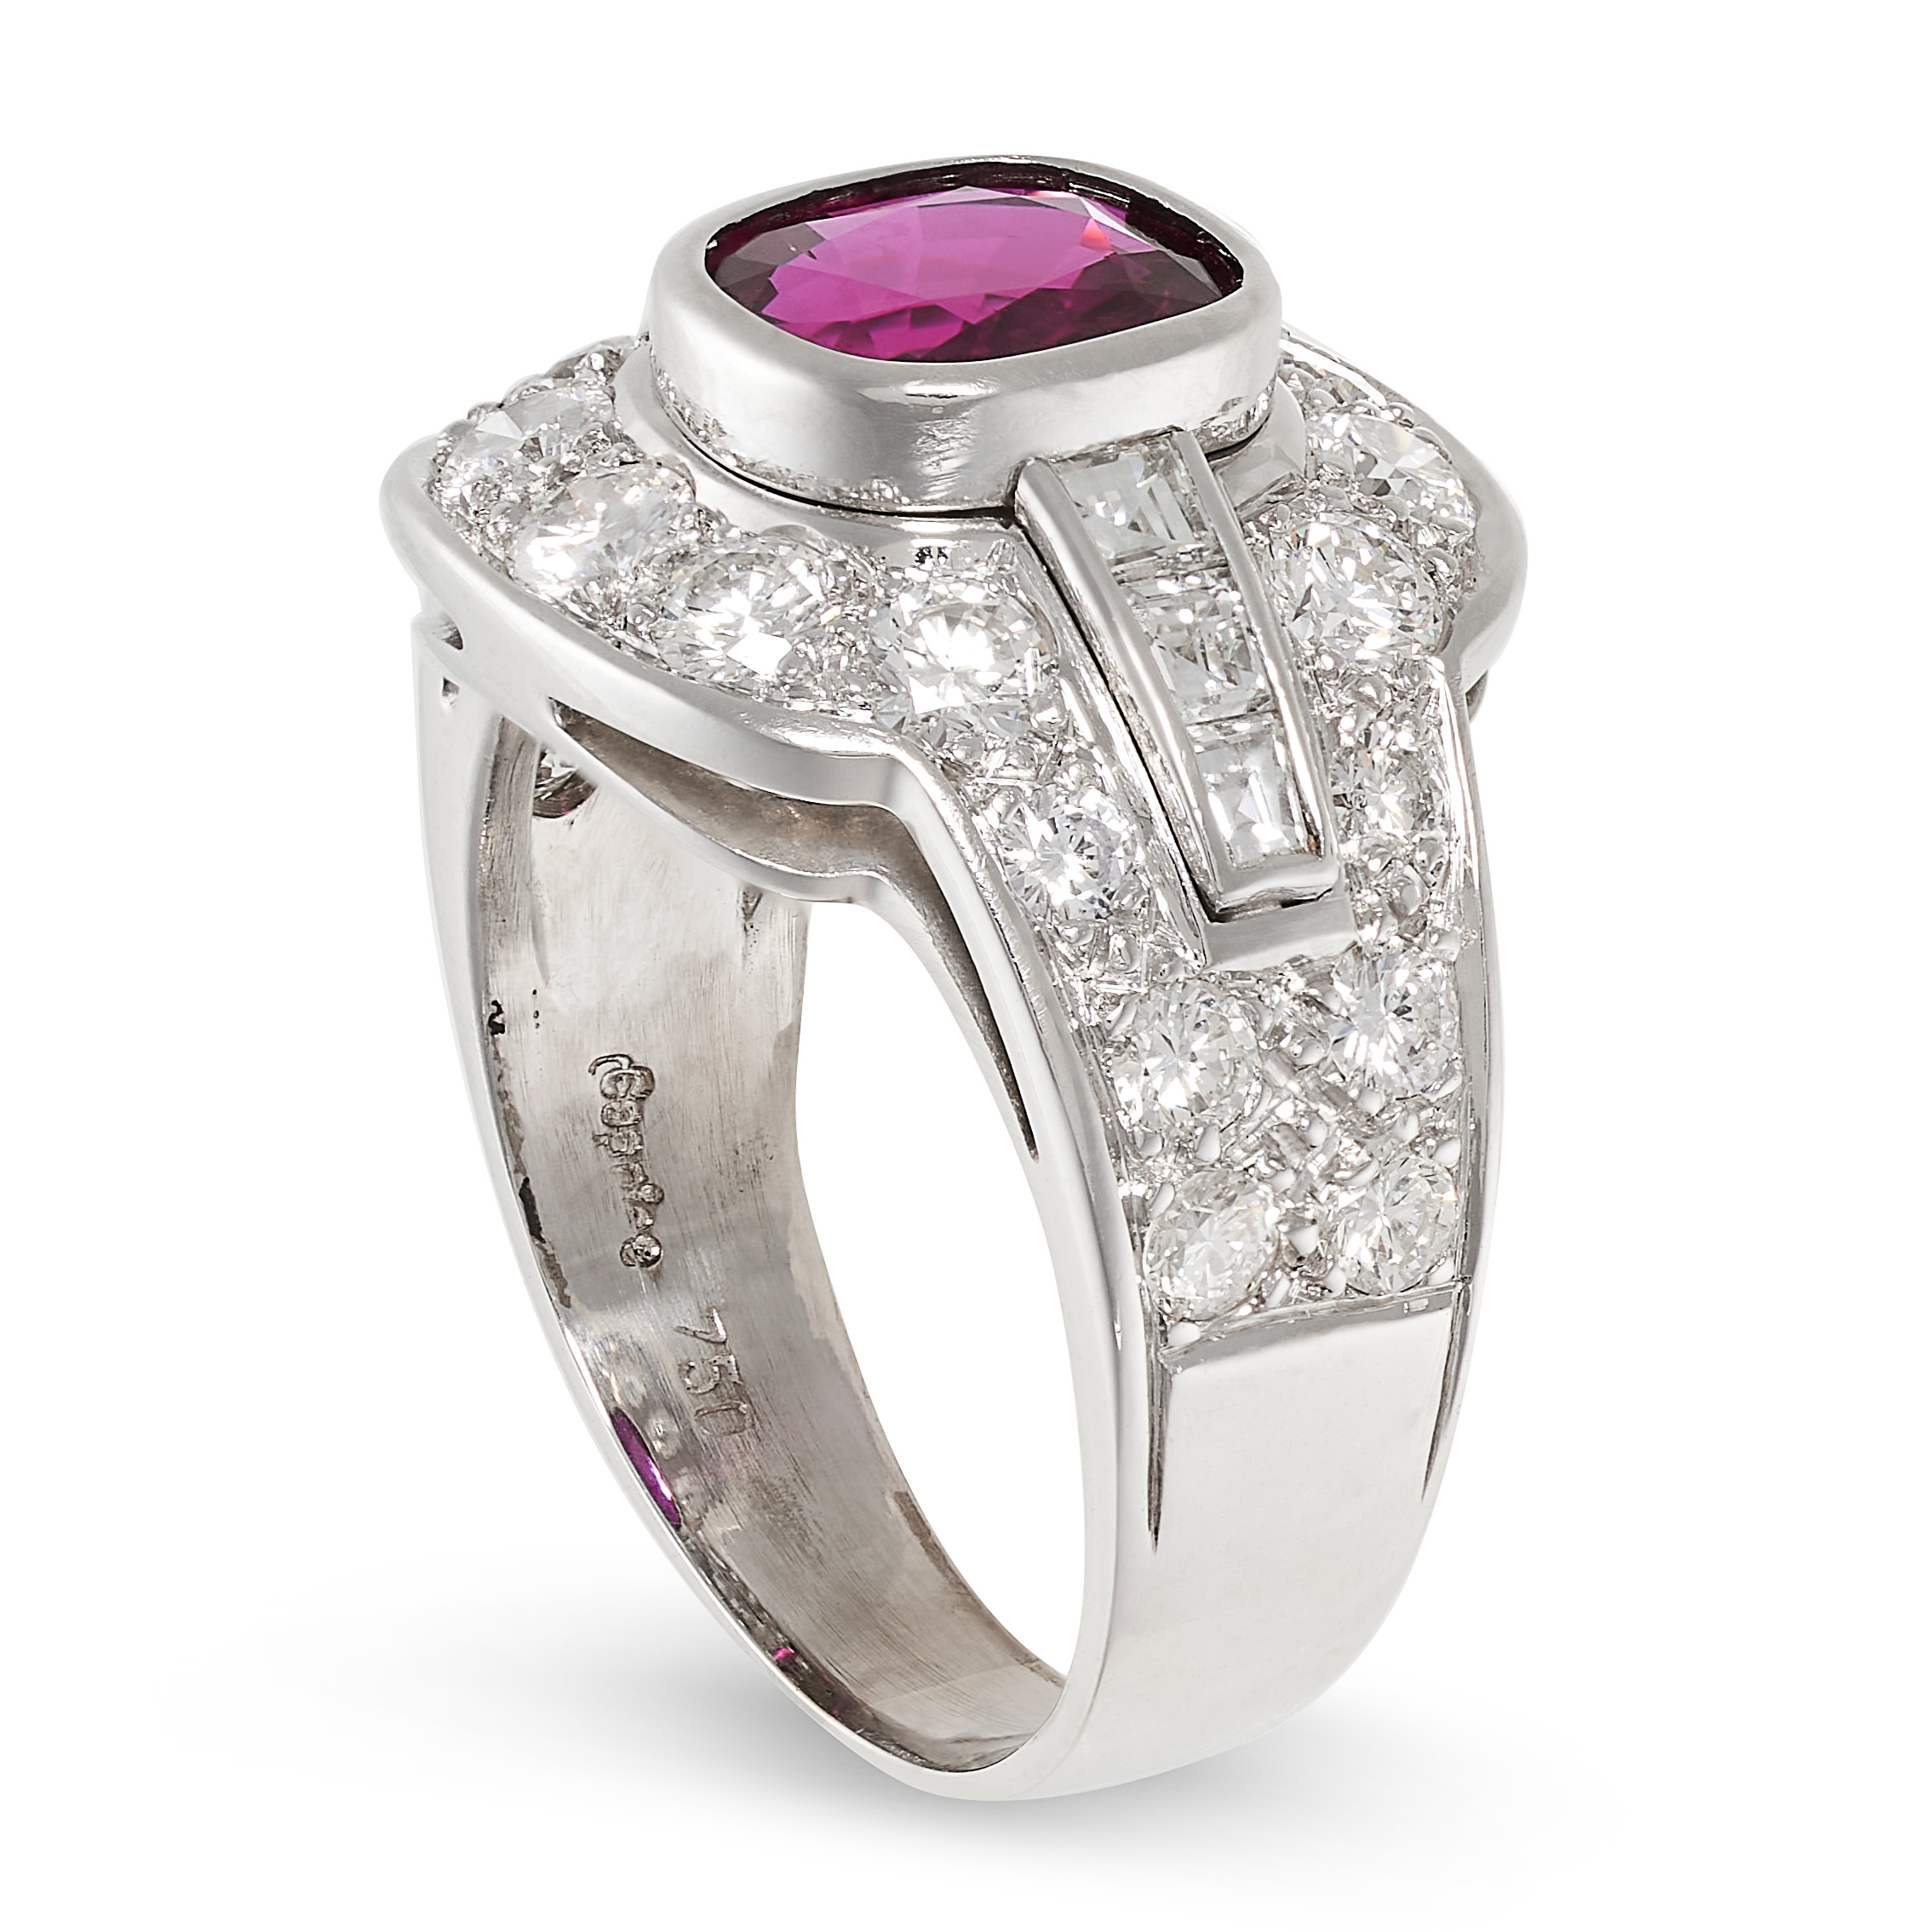 AN UNHEATED RUBY AND DIAMOND RING in 18ct white gold, set with a cushion cut ruby of 1.87 carats, - Image 2 of 2